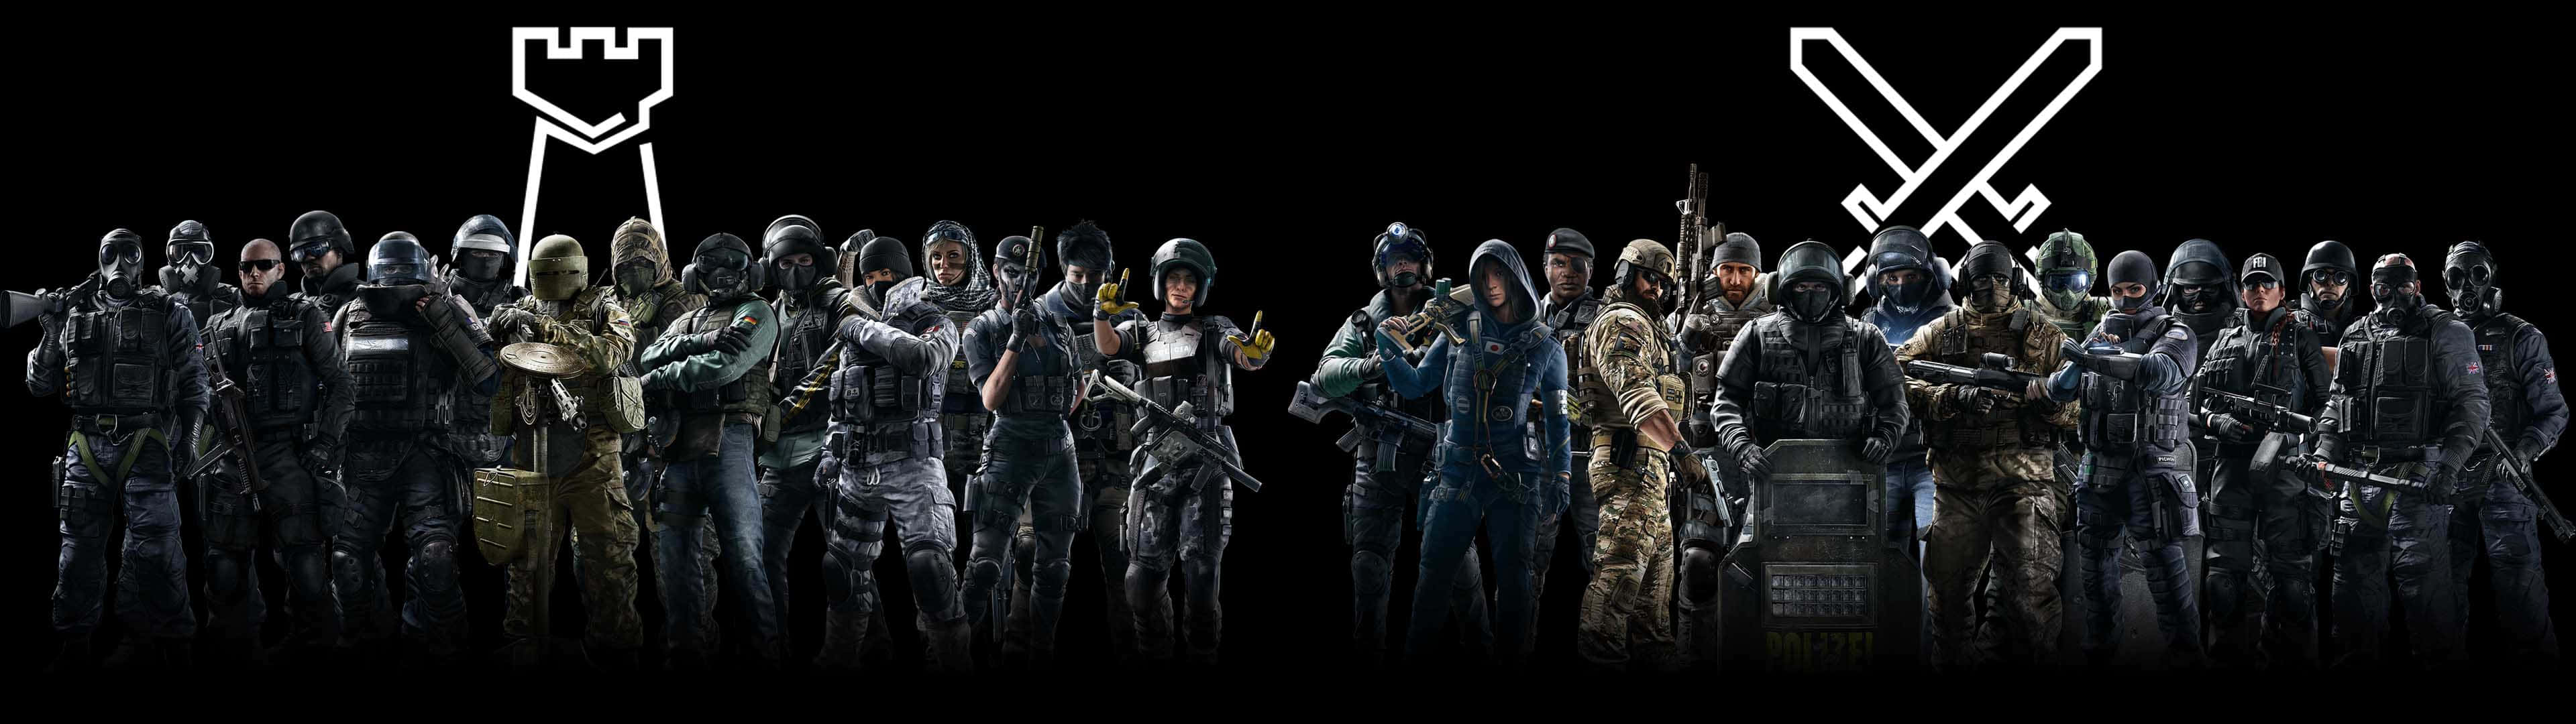 A Group Of Soldiers Standing In Front Of A Black Background Wallpaper